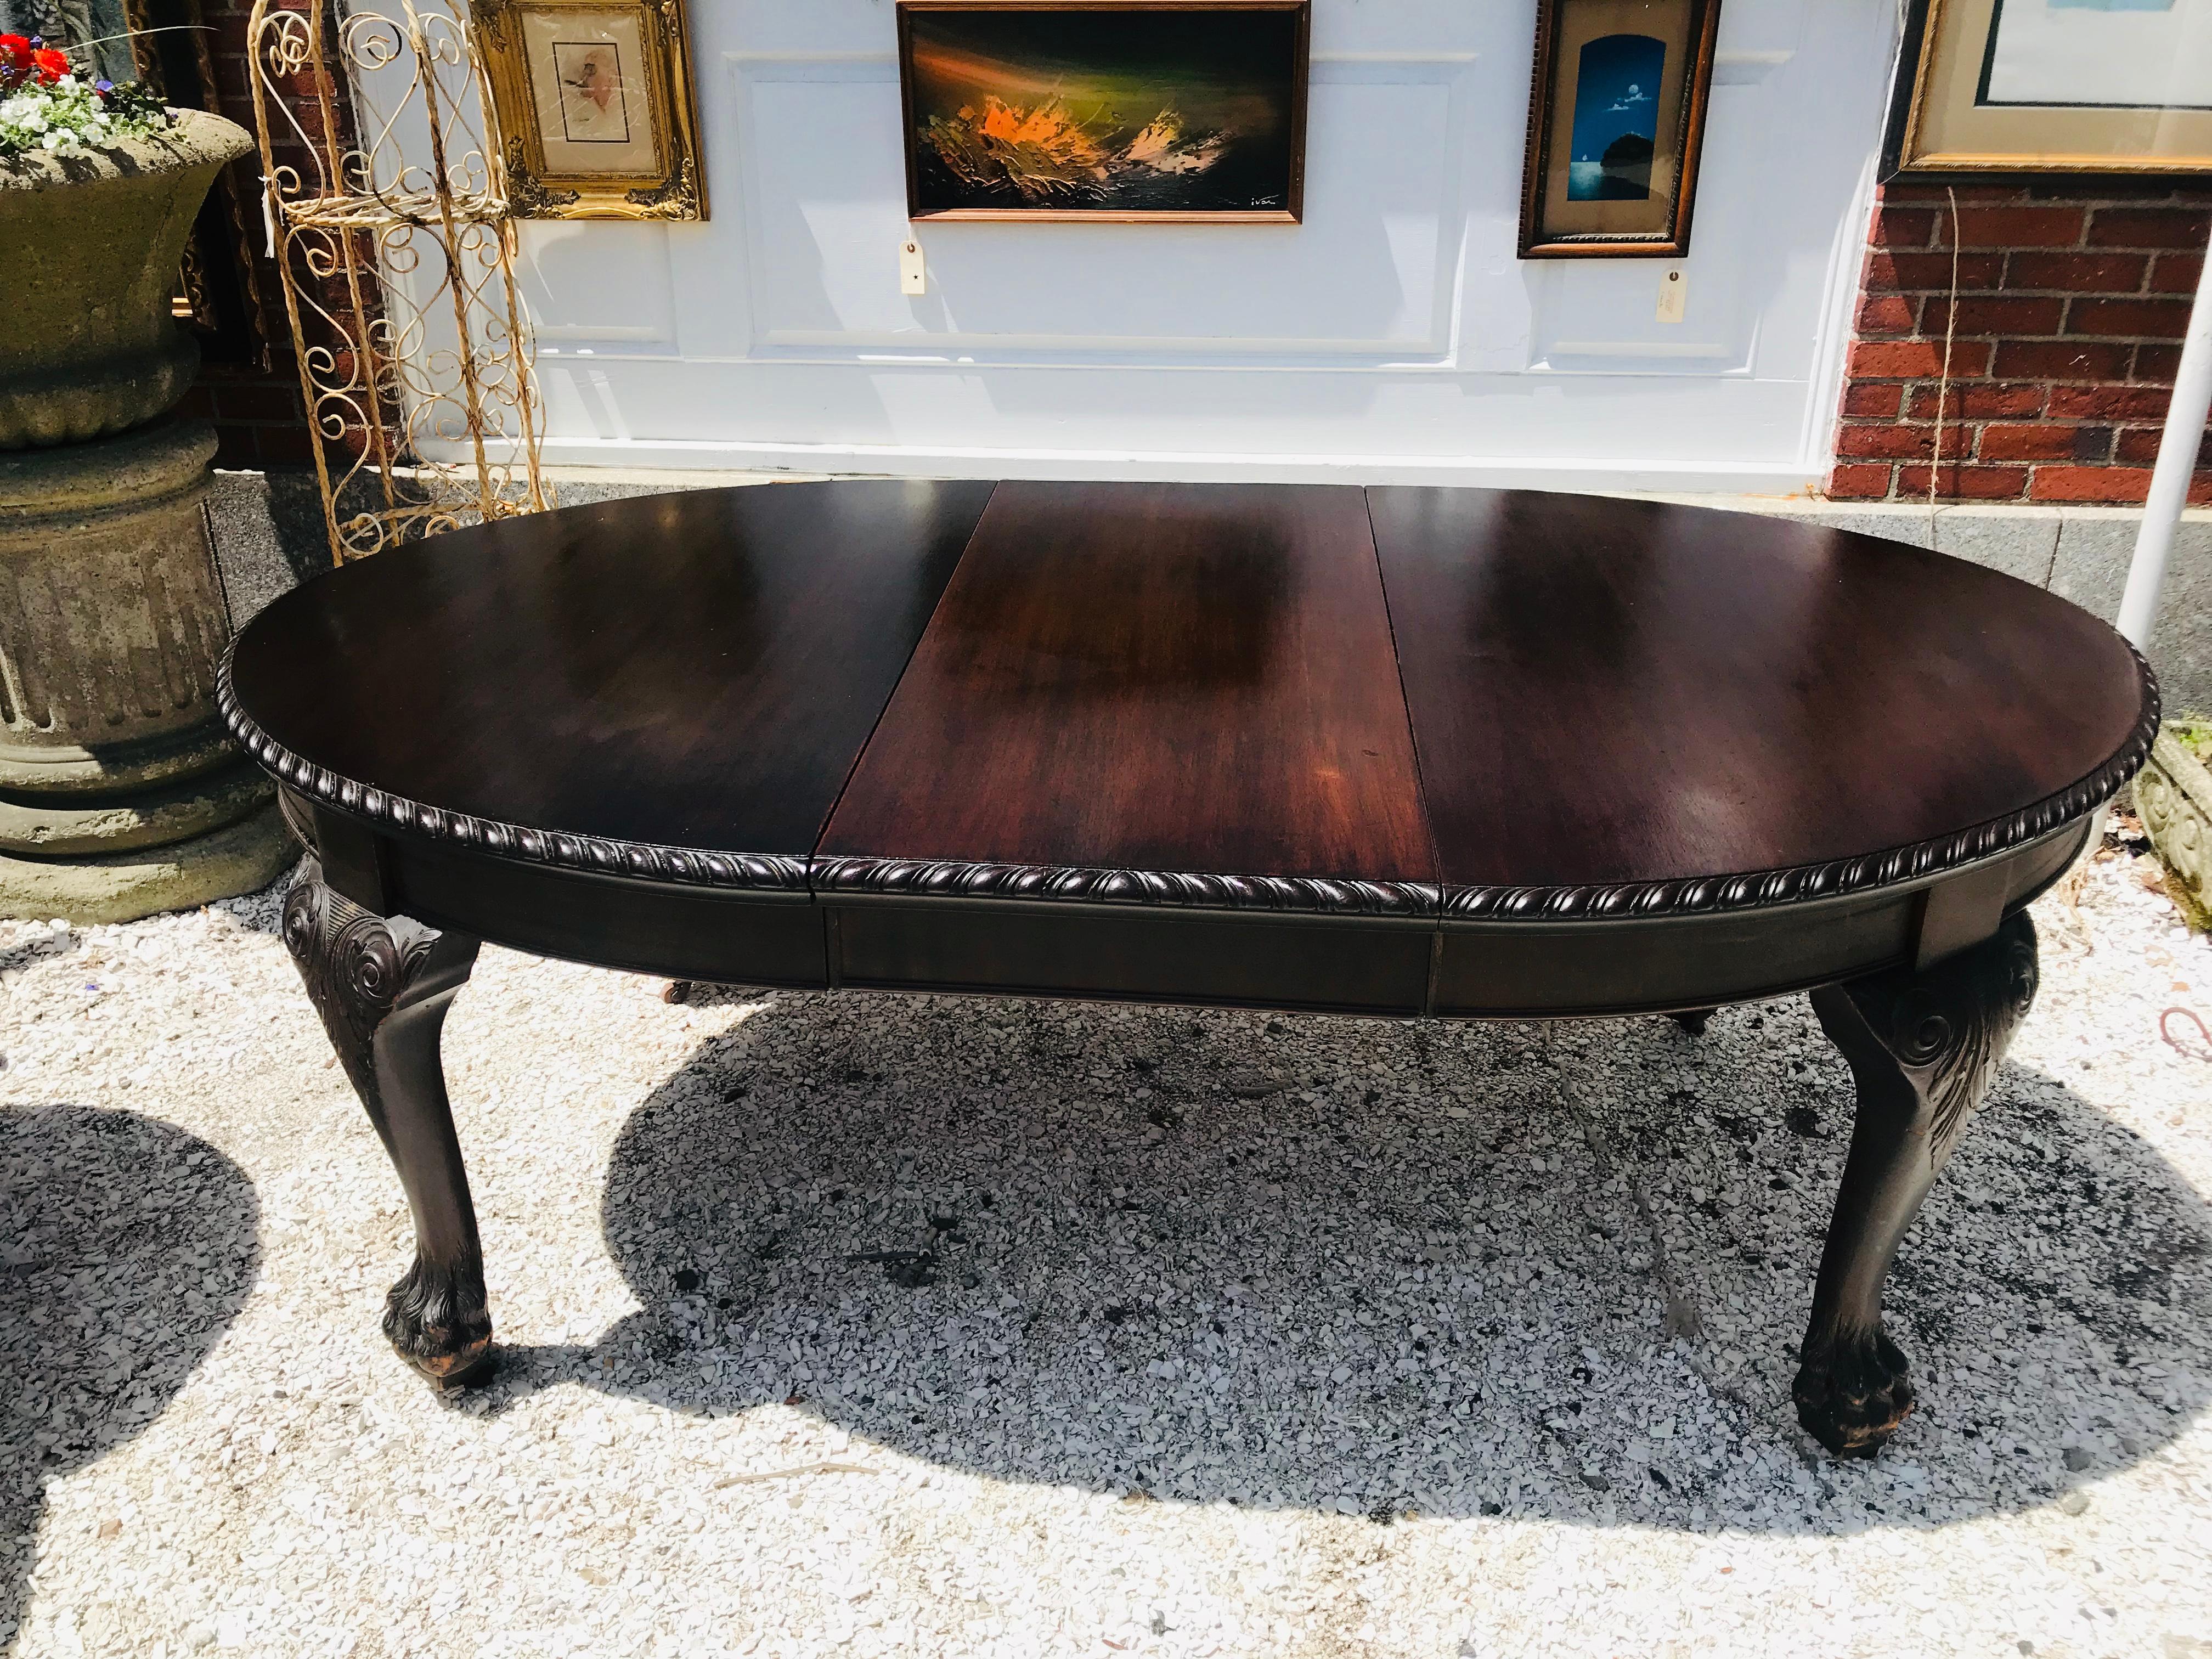 American Period New England Duncan Phyfe Dining Room Table, 1770